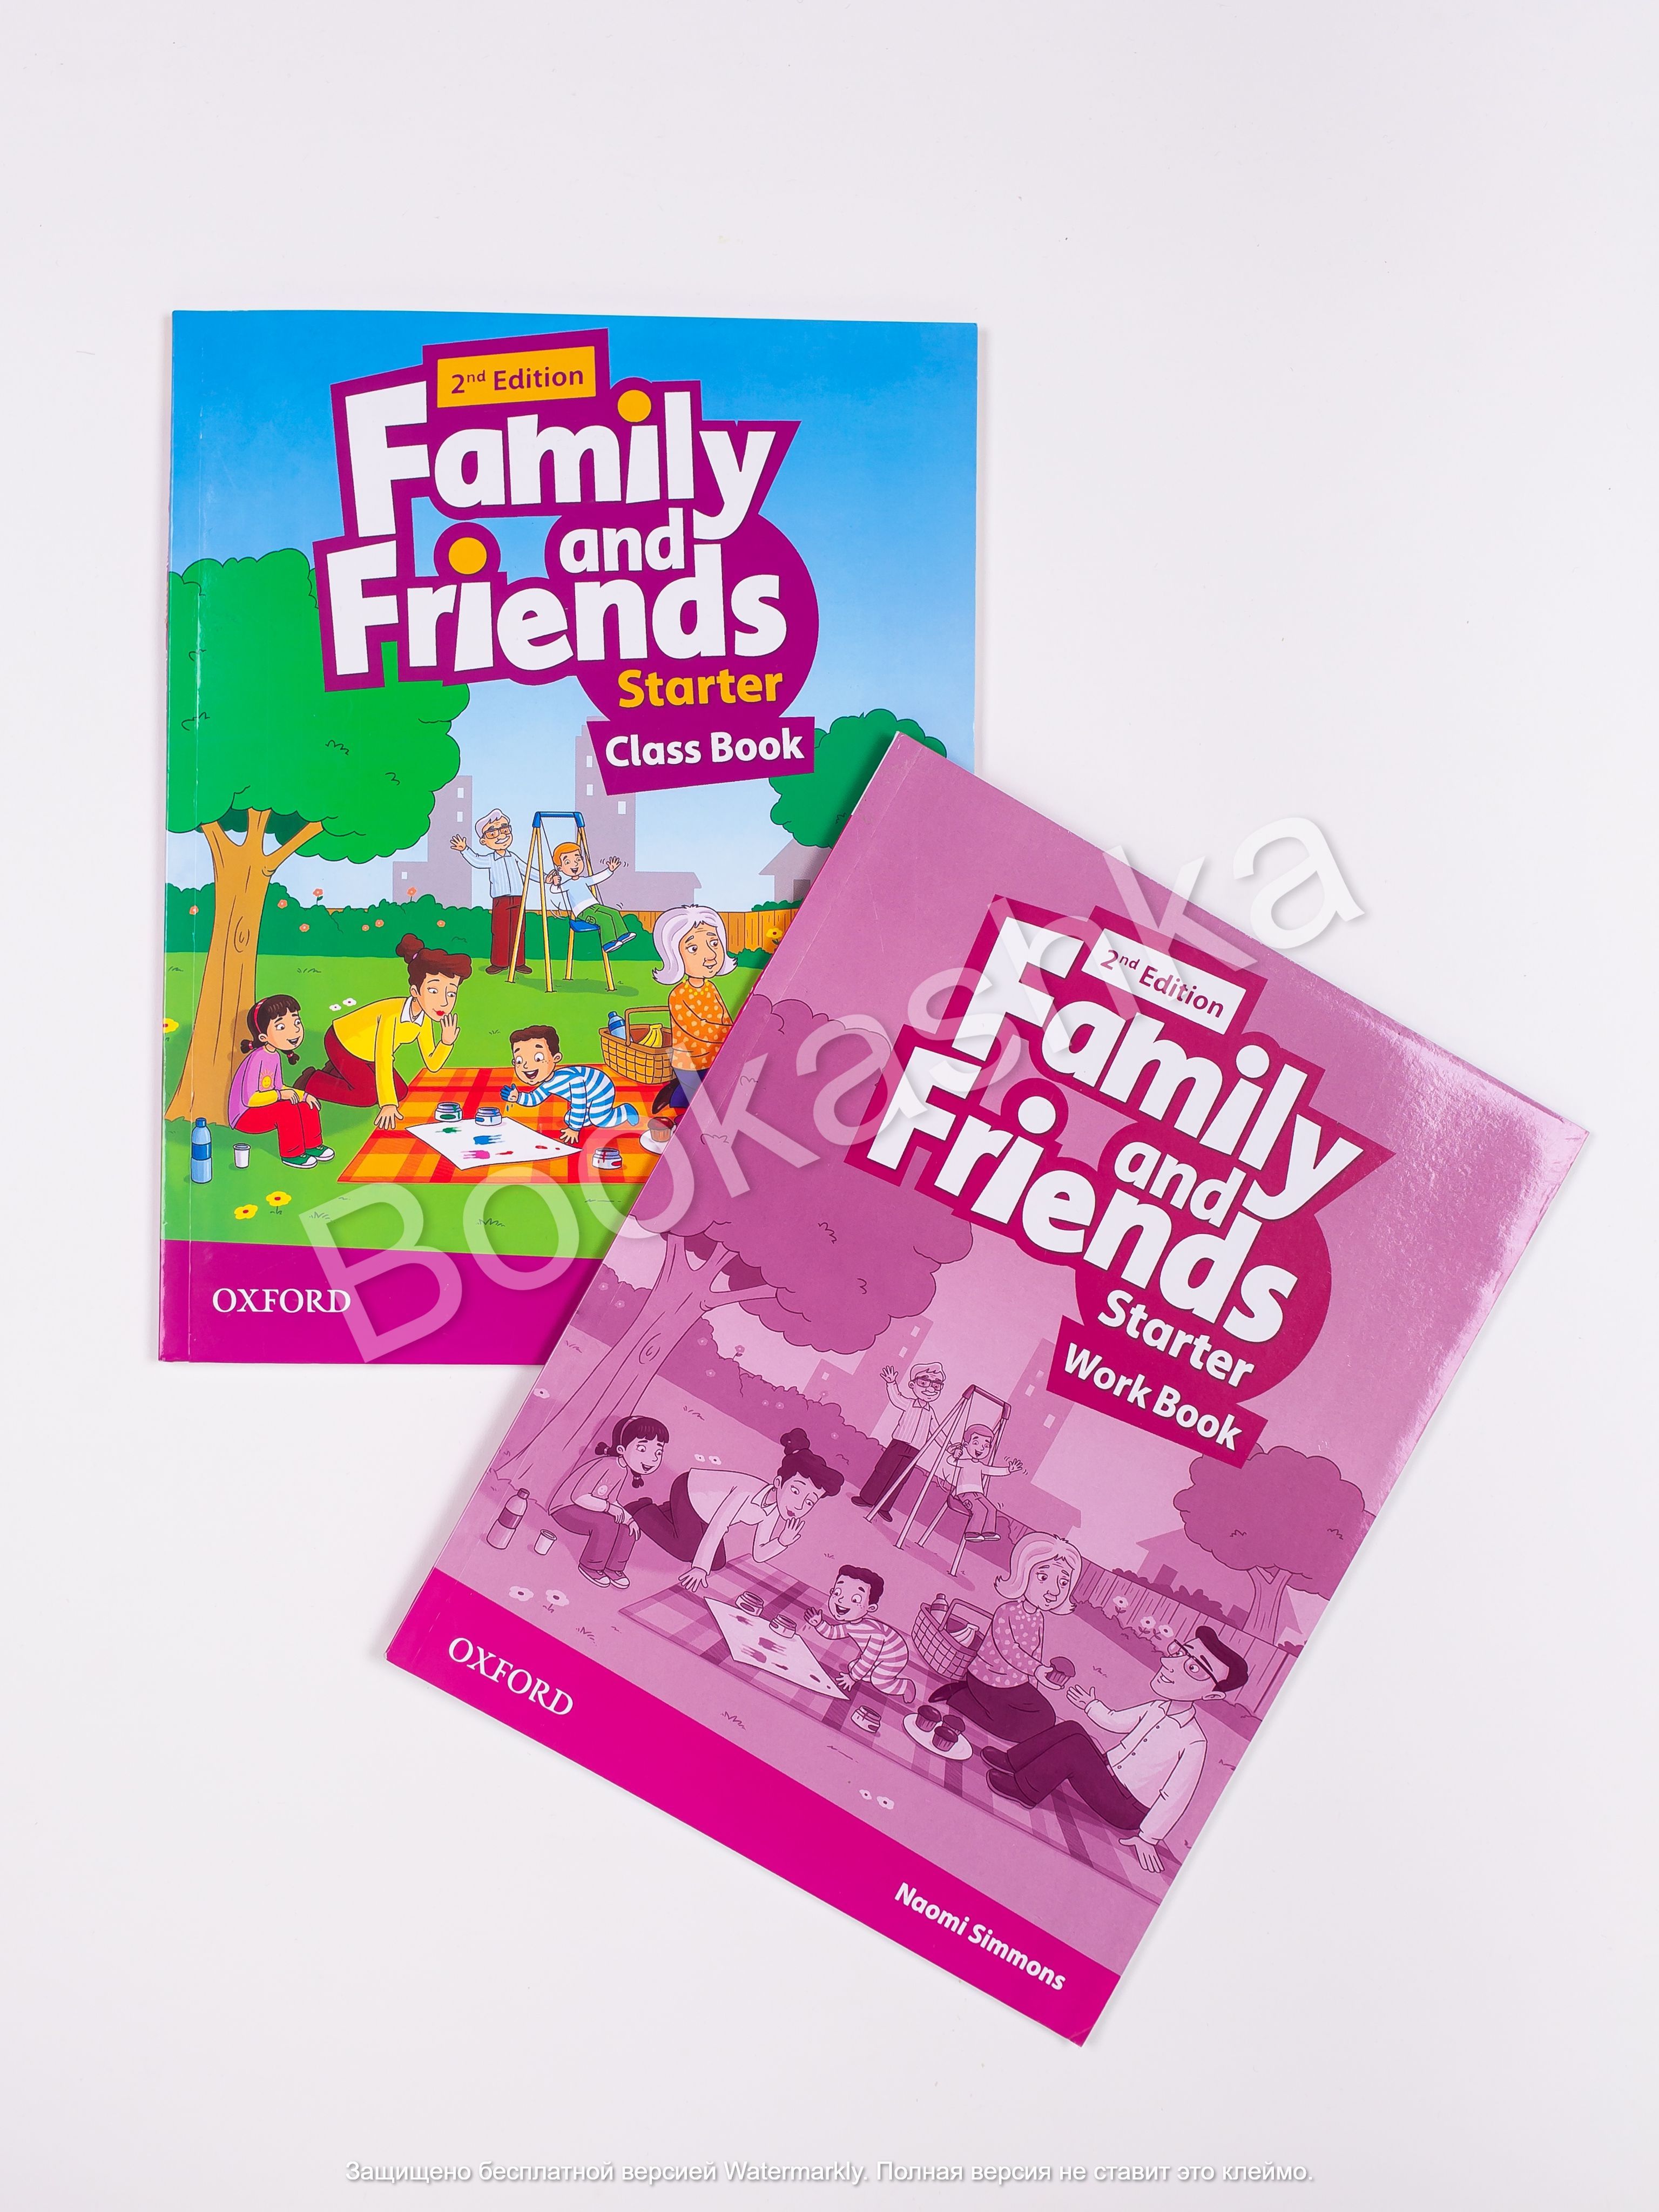 Friends starter book. Family and friends Starter class book. Family and friends Starter Workbook. Family and friends Starter teacher's book задняя сторона обложки. AA Family and friends Starter.